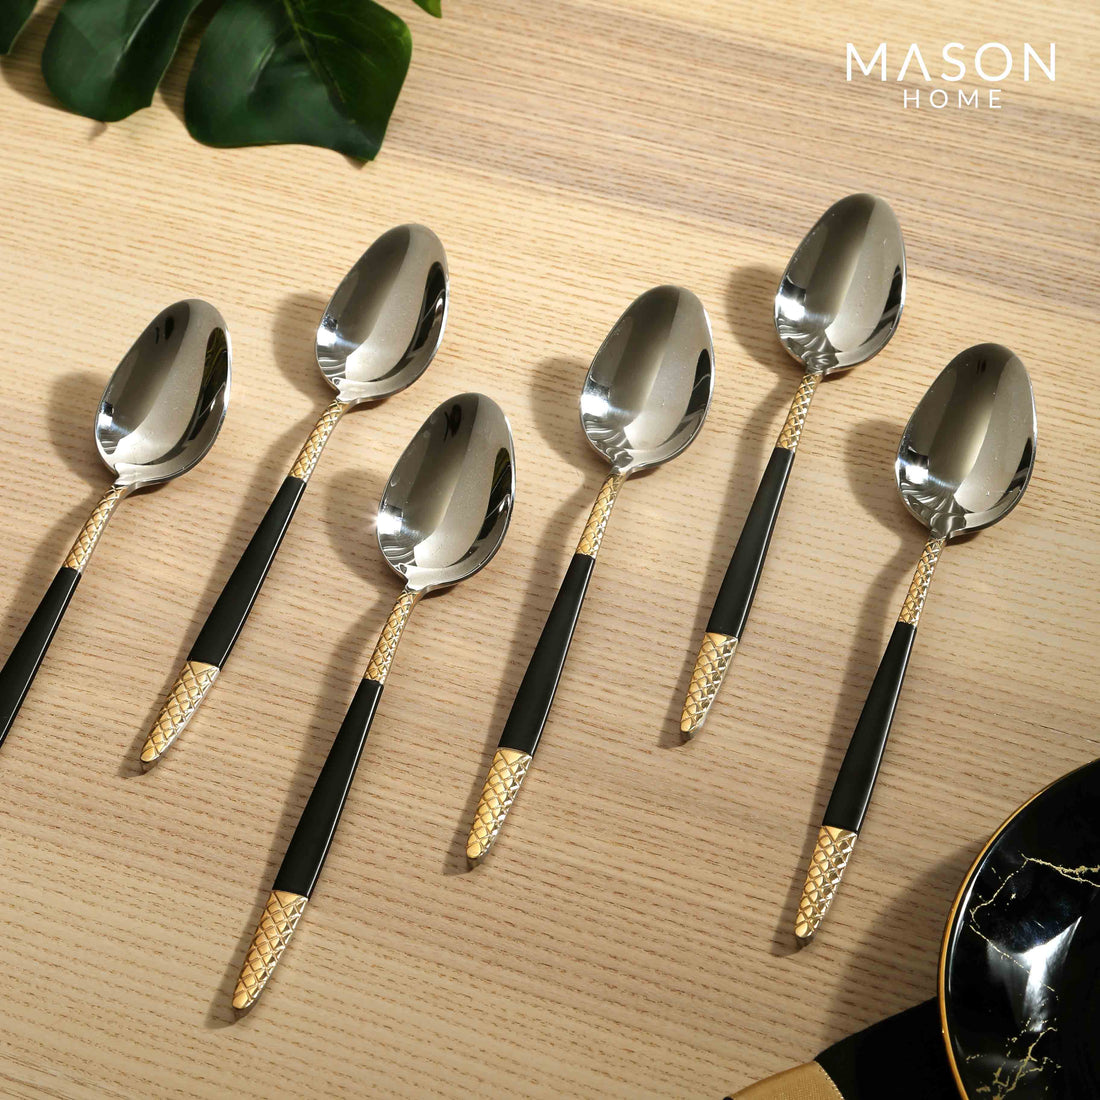 Baroque Dining Spoon - Set Of 6